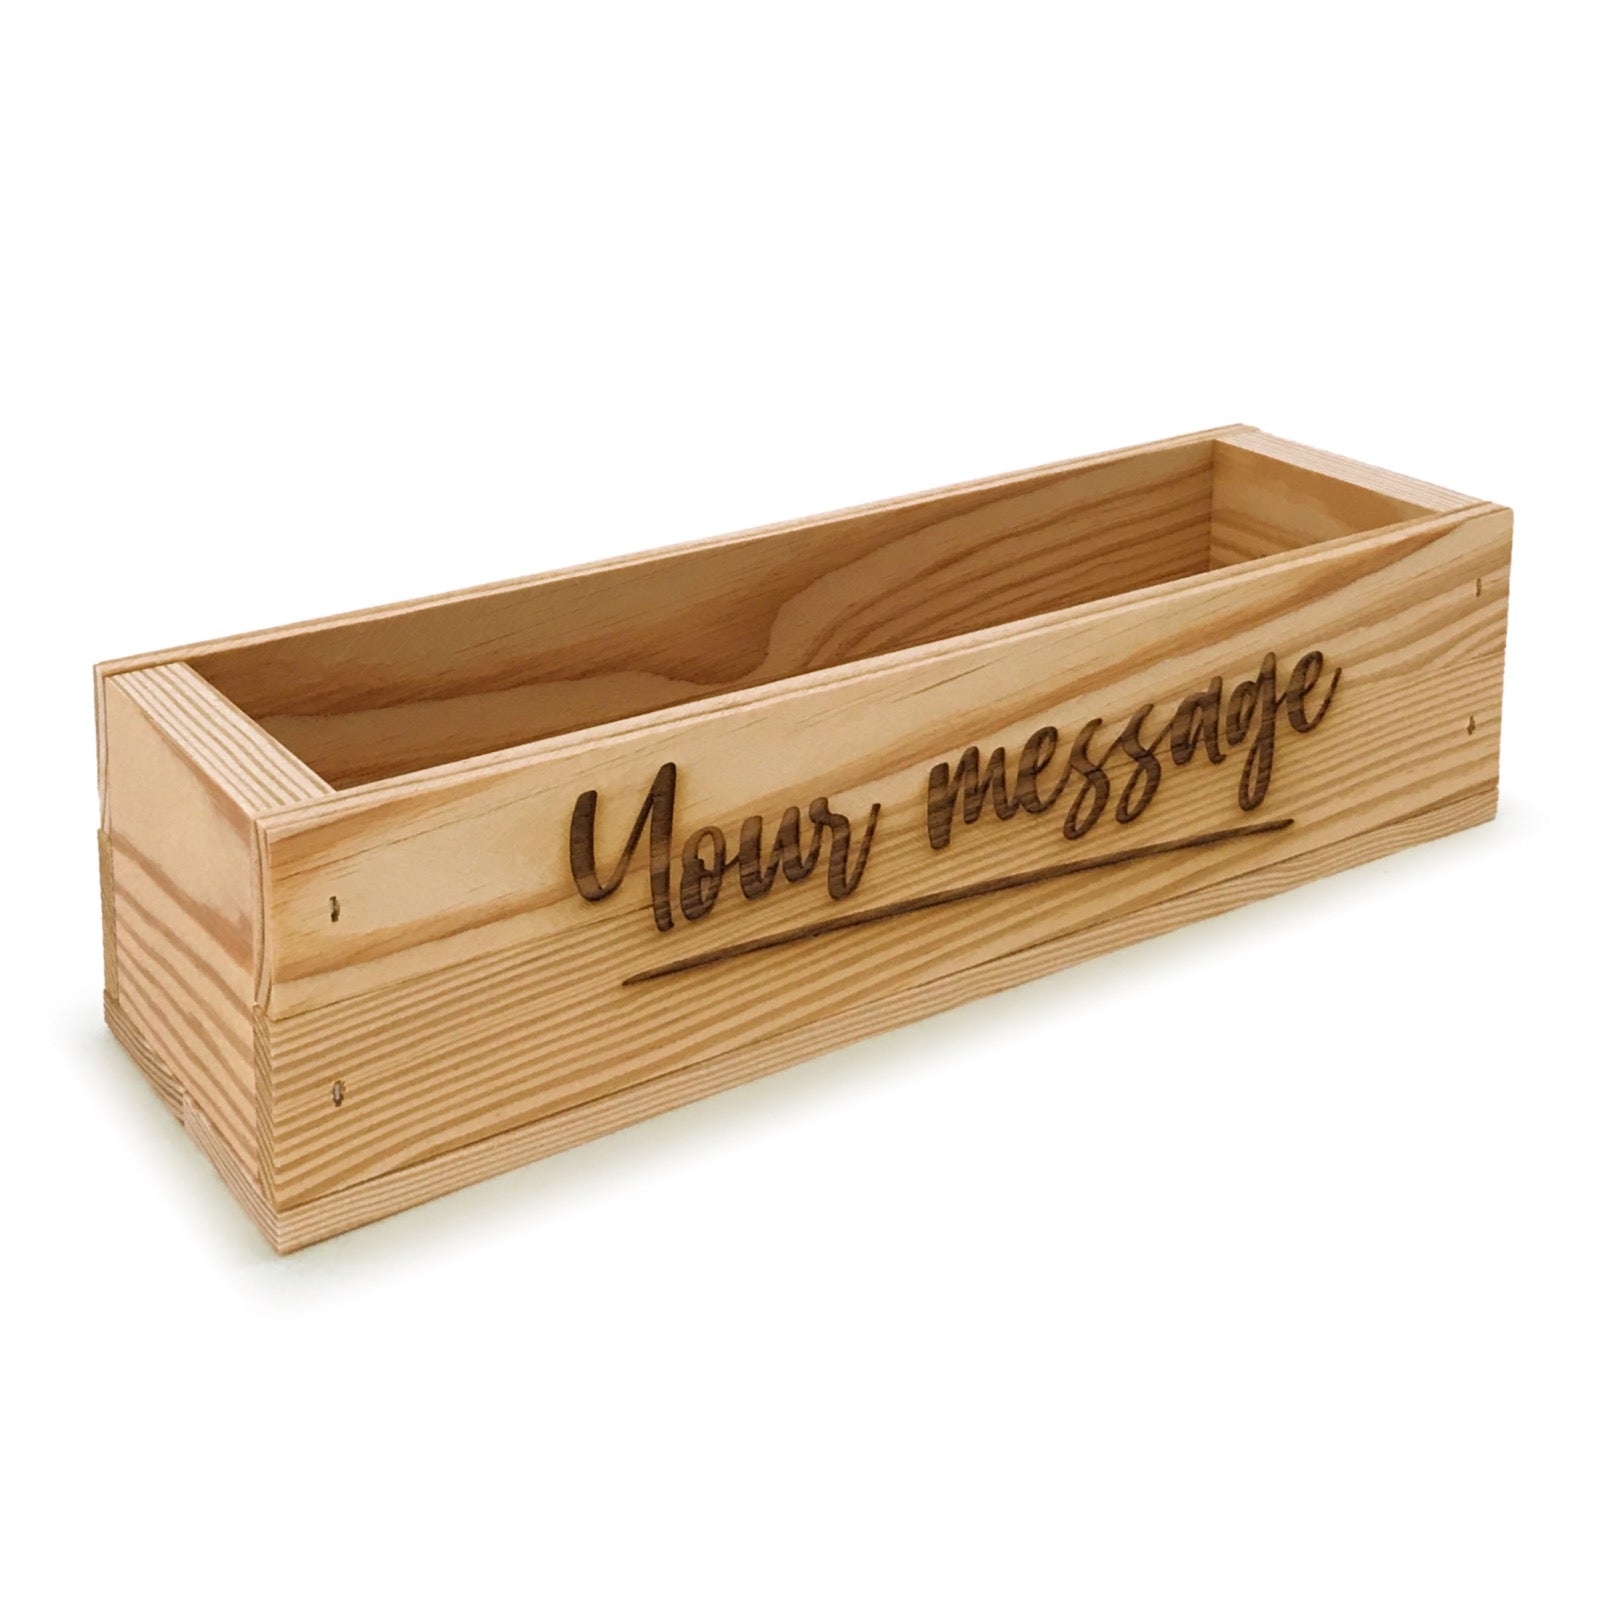 Single bottle wine crate with custom message 13x3.5x3.5, 6-WB-13-3.5-3.5-ST-NW-NL, 12-WB-13-3.5-3.5-ST-NW-NL, 24-WB-13-3.5-3.5-ST-NW-NL, 48-WB-13-3.5-3.5-ST-NW-NL, 96-WB-13-3.5-3.5-ST-NW-NL